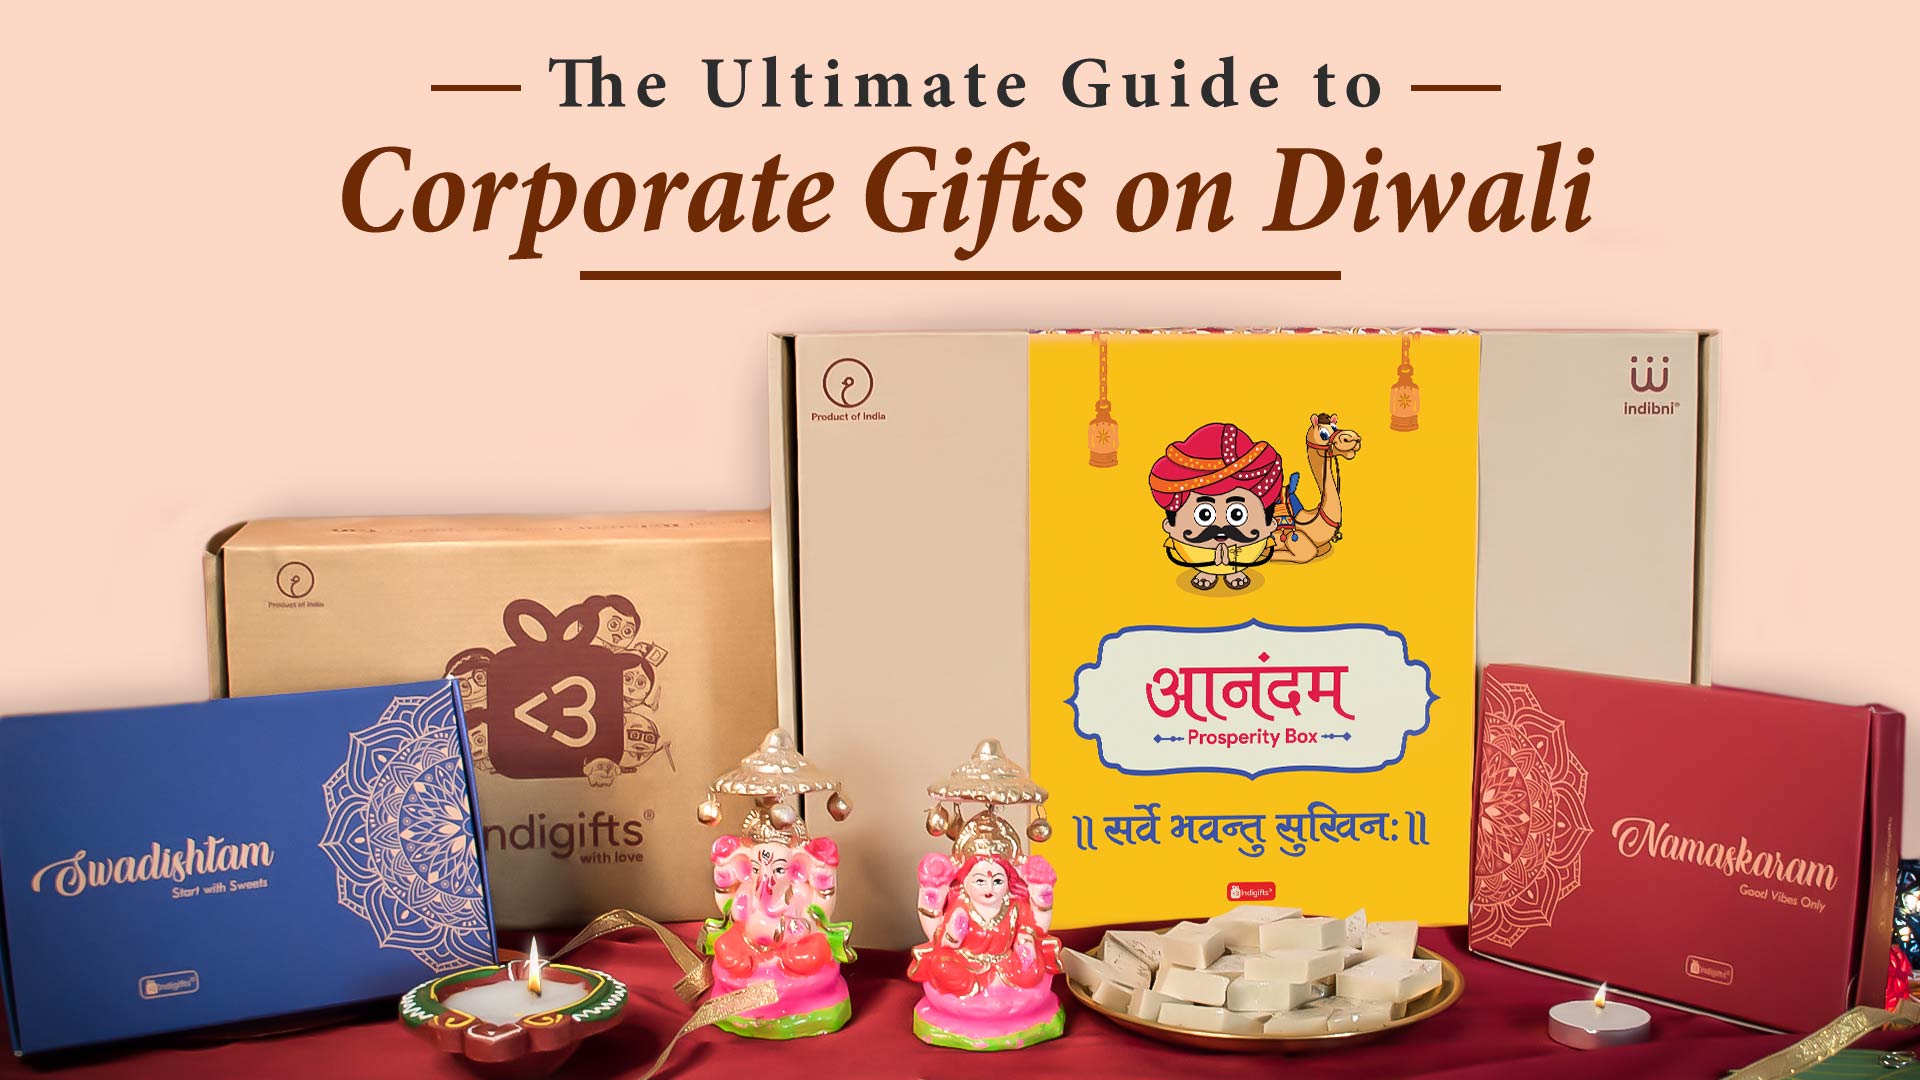 The Ultimate Guide to Corporate Gifts on Diwali